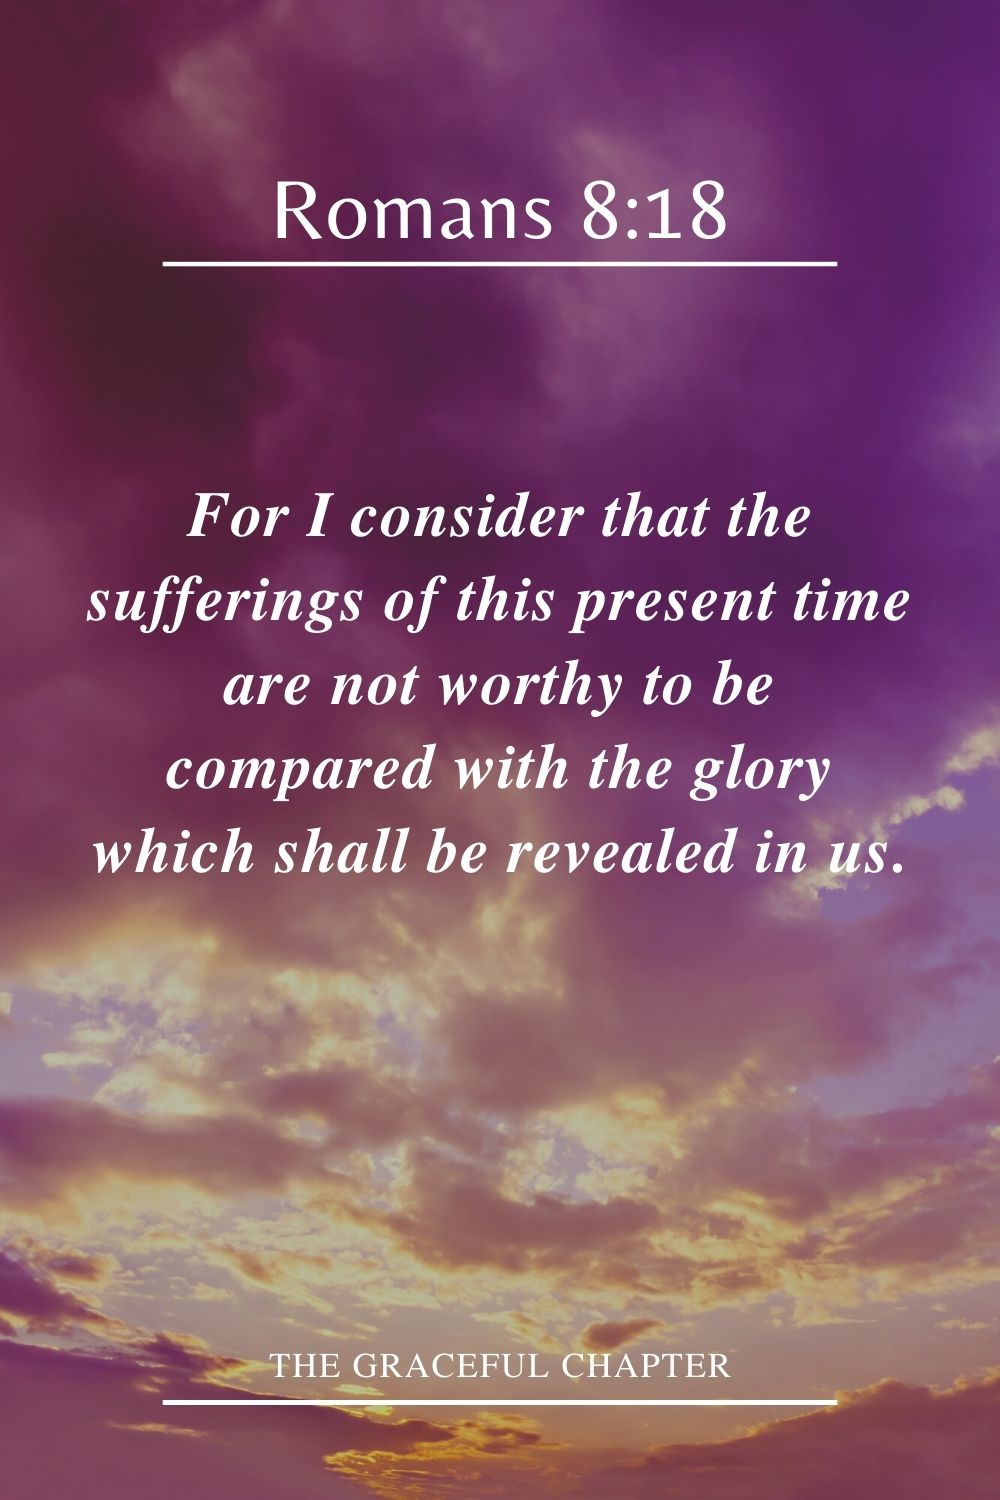 For I consider that the sufferings of this present time are not worthy to be compared with the glory which shall be revealed in us. Romans 8:18